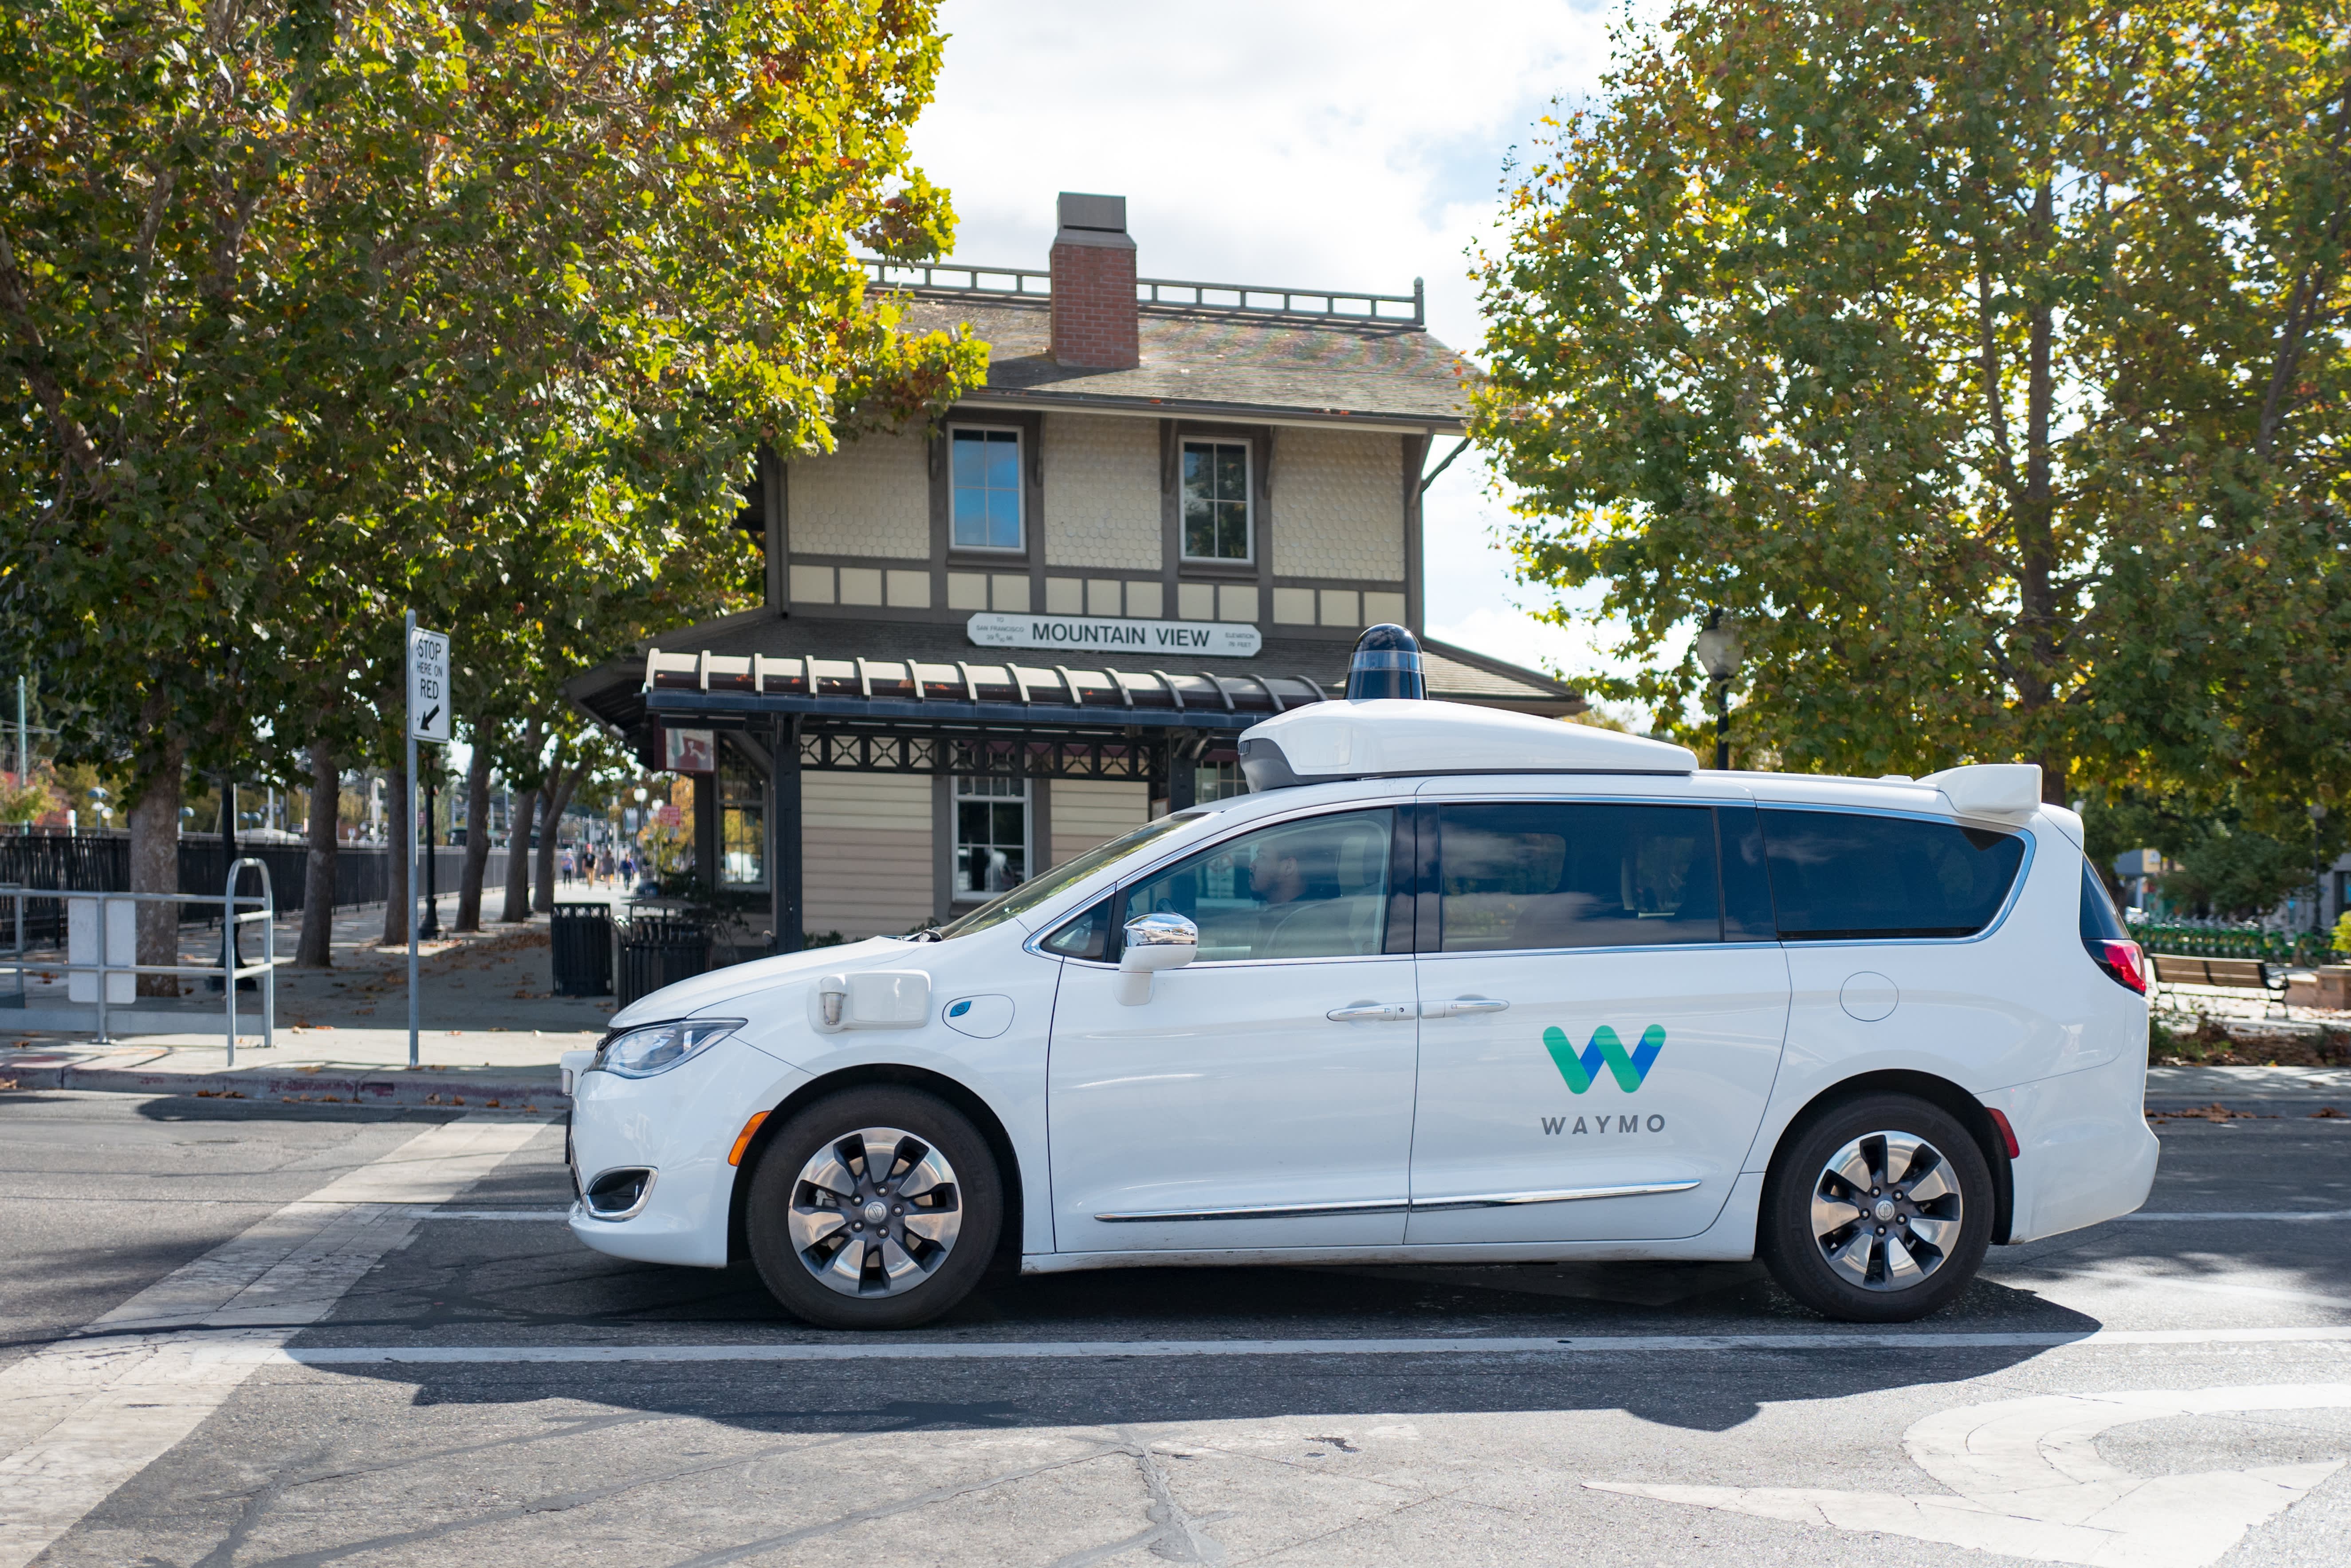 Google sibling company Waymo announced Wednesday a $2.5 billion investment round, which will go toward advancing its autonomous driving technology and